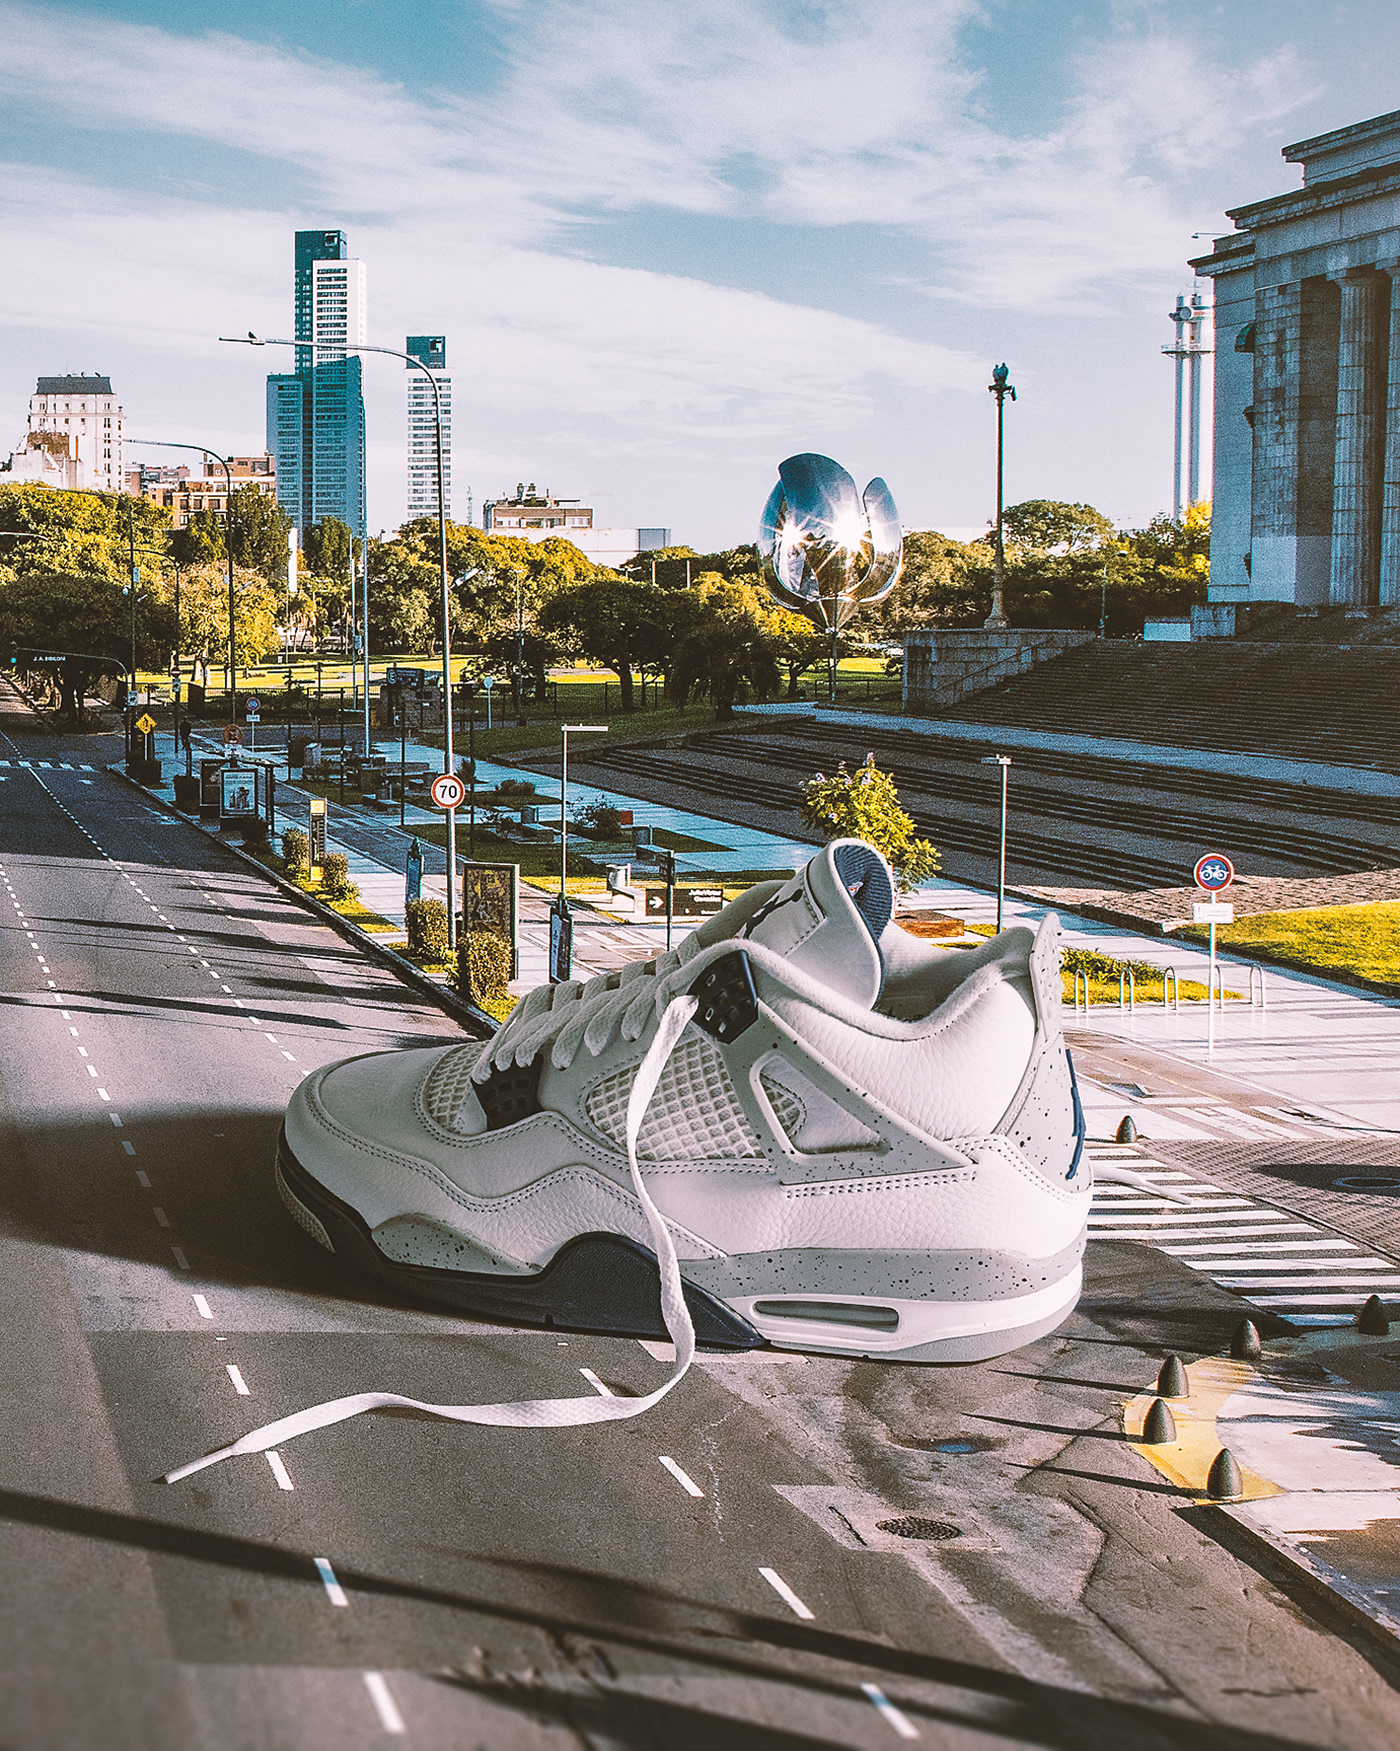 Giant sneaker photo composite in Argentina. Retouching using Photoshop